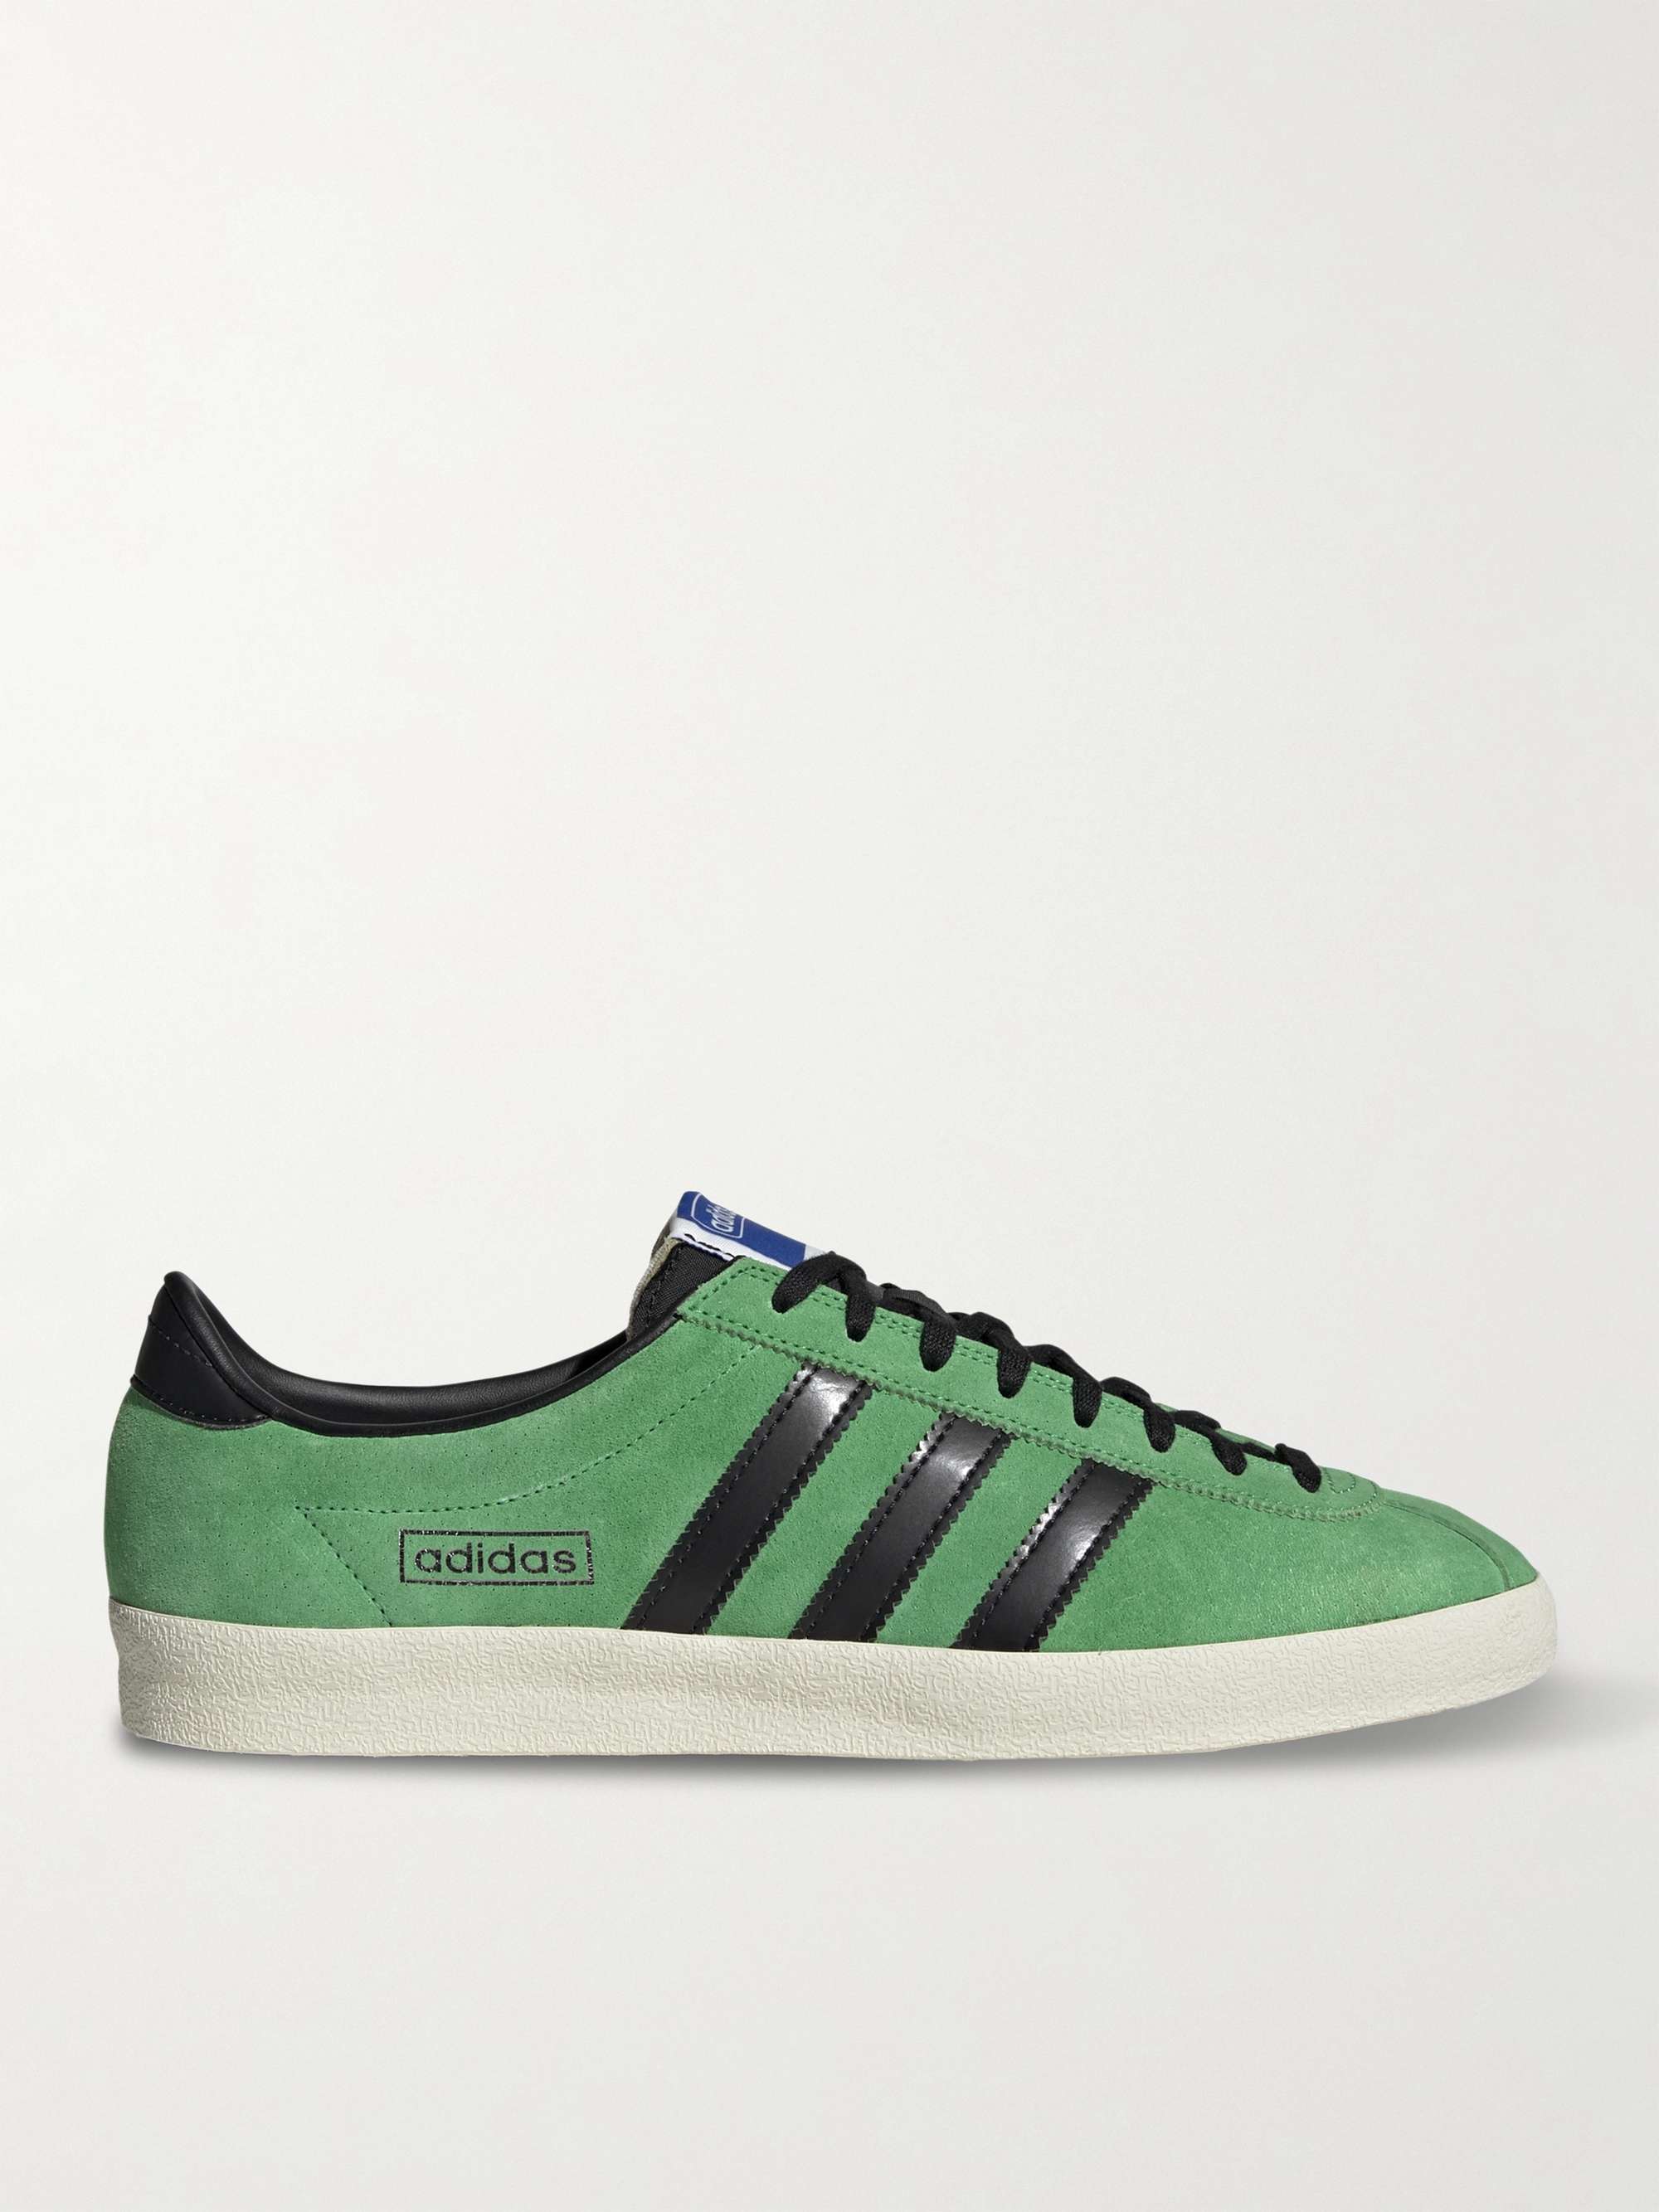 ADIDAS ORIGINALS Mexicana Leather-Trimmed Suede Sneakers for Men | MR PORTER